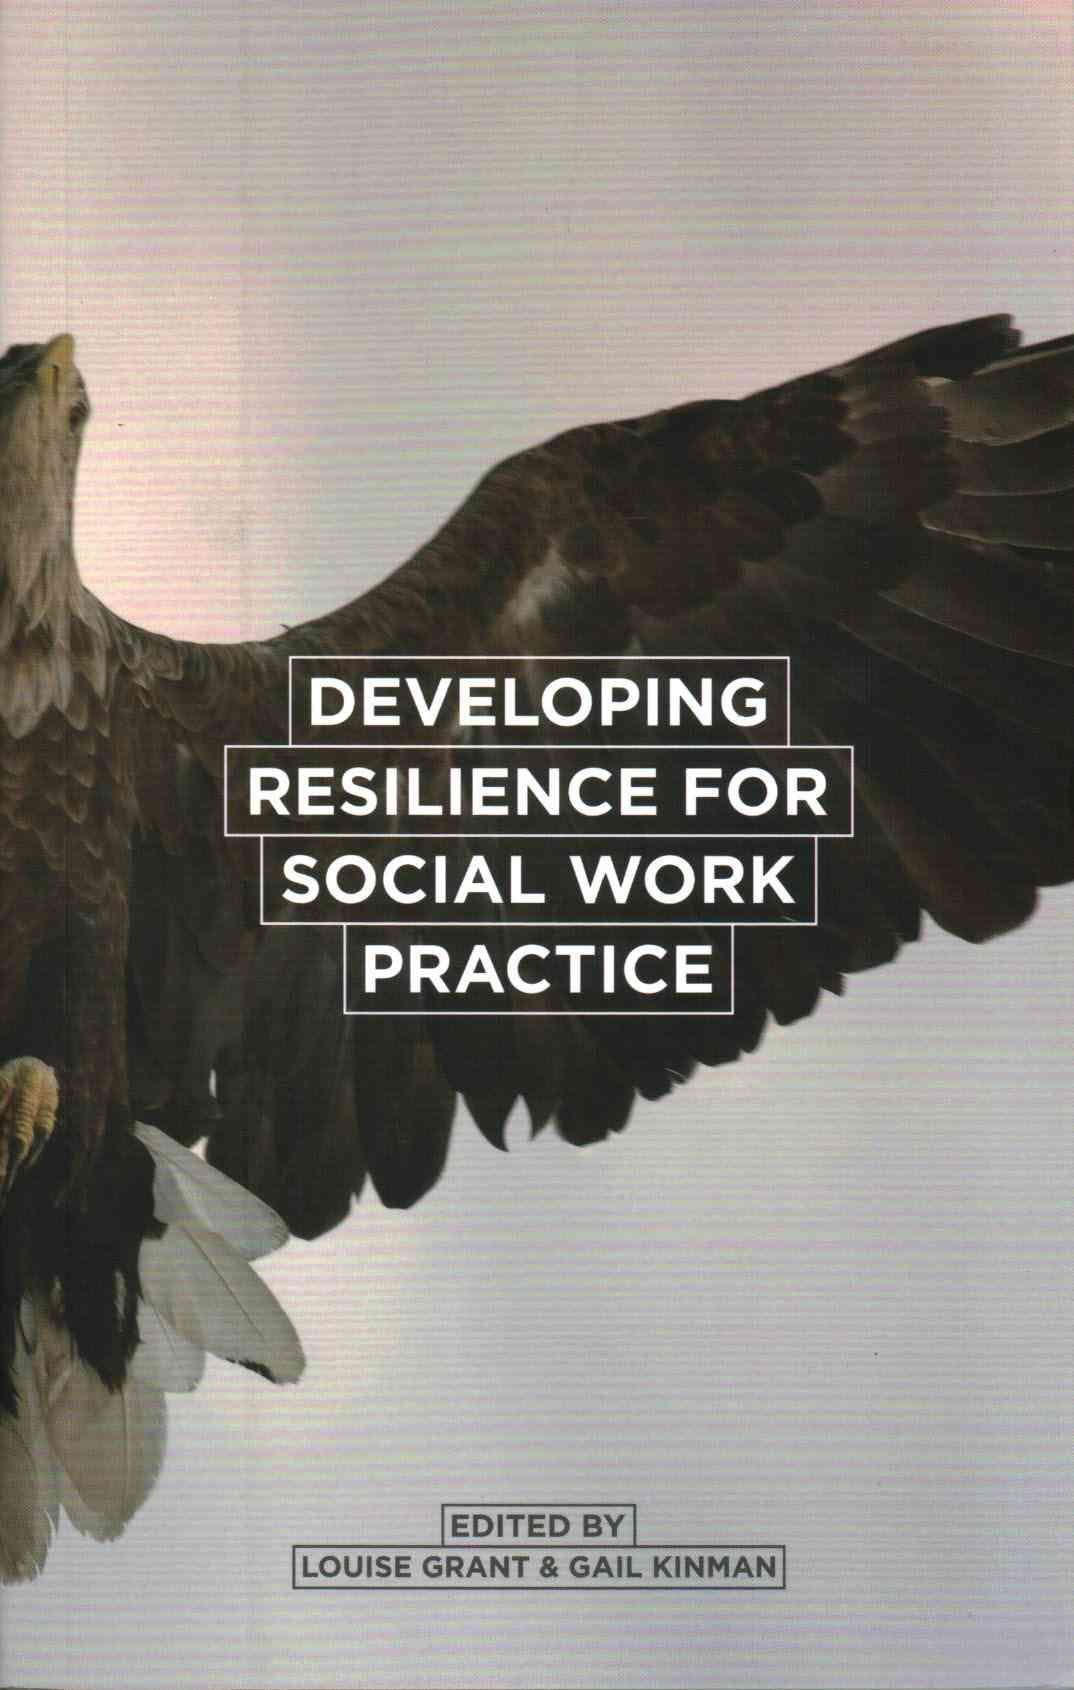 Developing Resilience for Social Work Practice